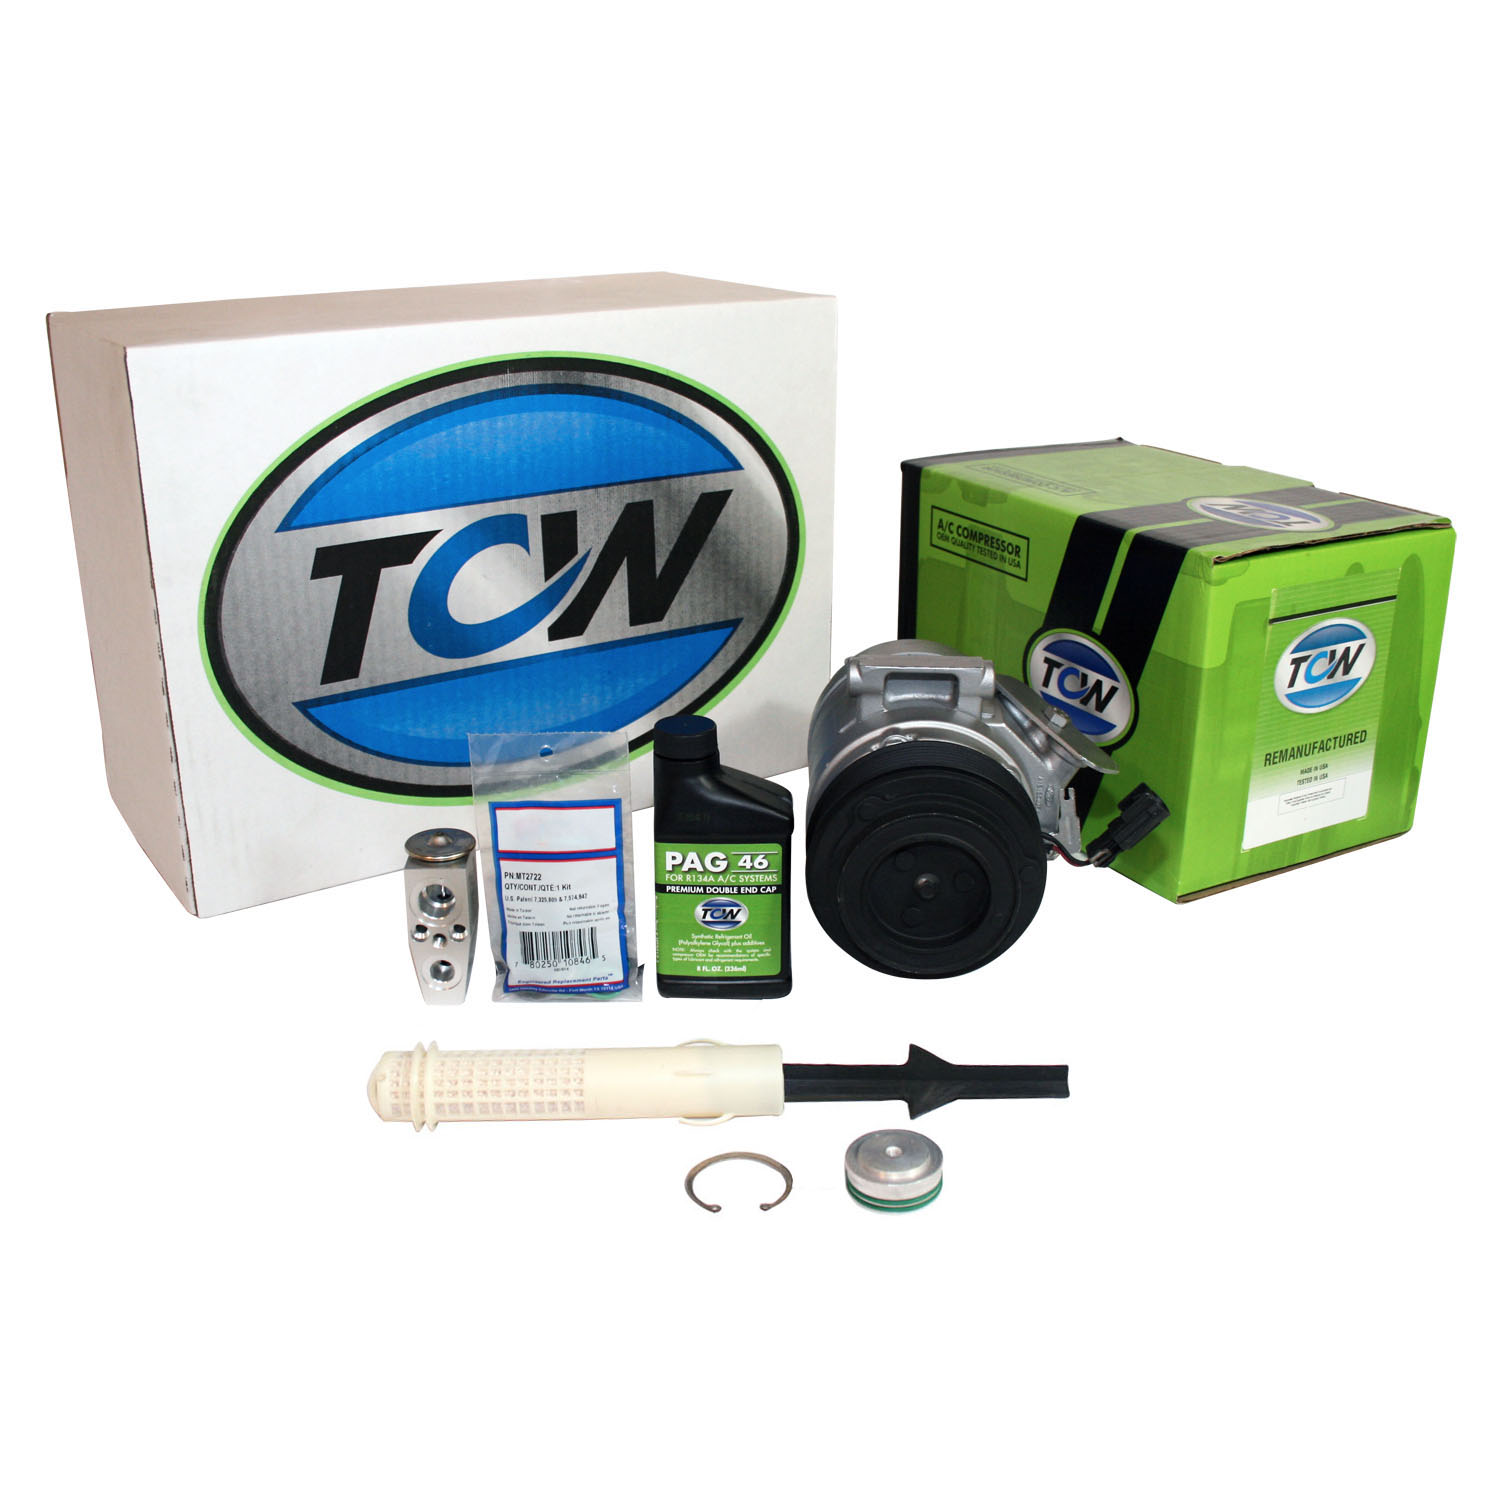 TCW Vehicle A/C Kit K1000404R Remanufactured Product Image field_60b6a13a6e67c